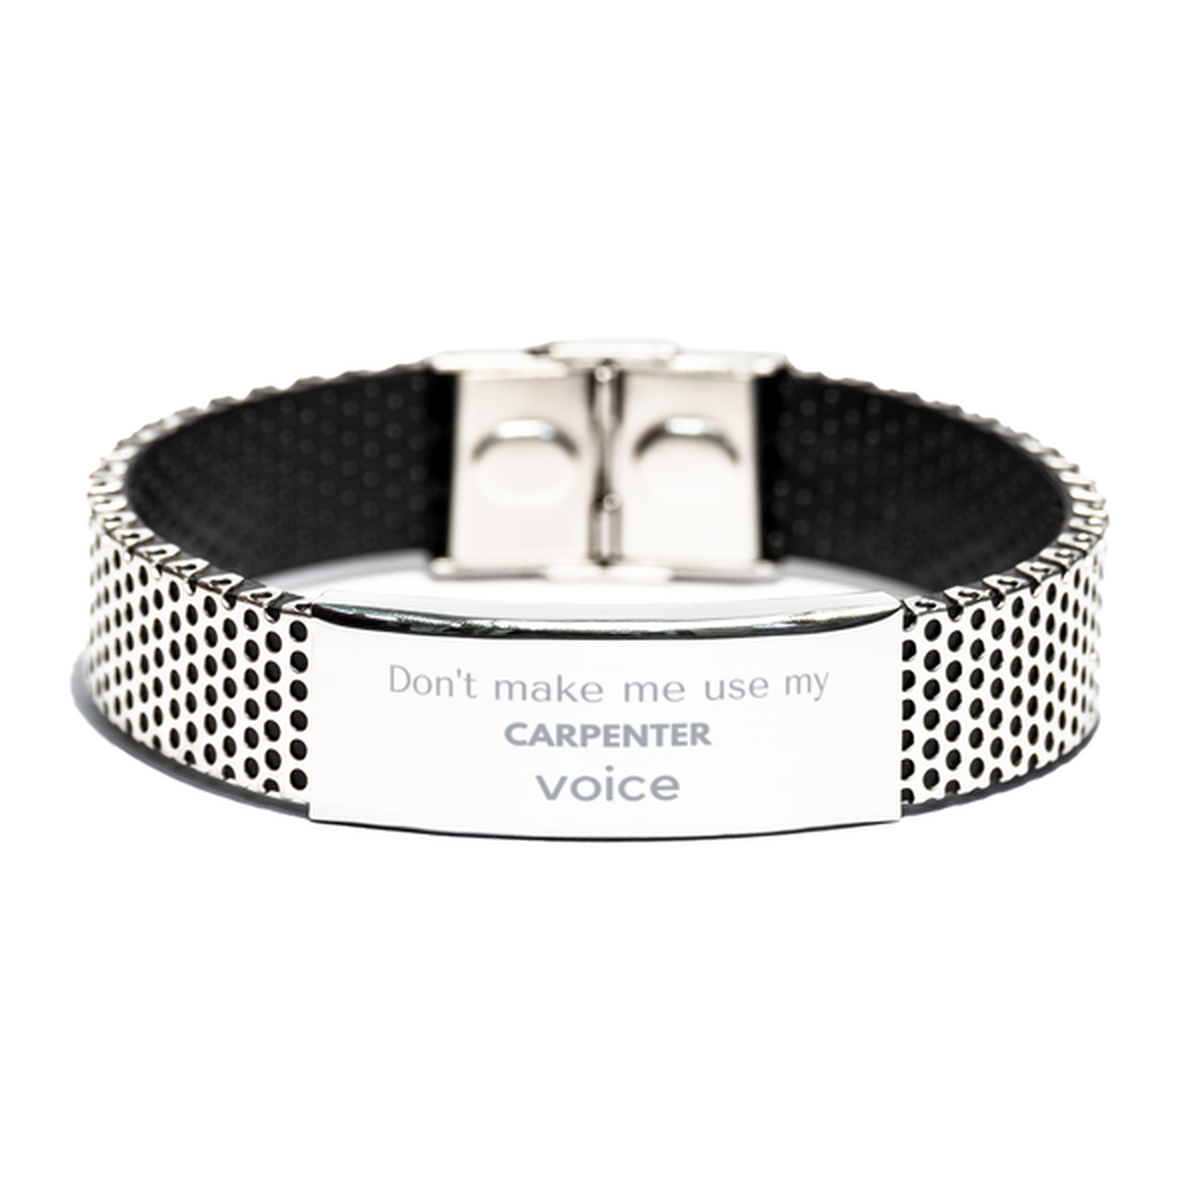 Don't make me use my Carpenter voice, Sarcasm Carpenter Gifts, Christmas Carpenter Stainless Steel Bracelet Birthday Unique Gifts For Carpenter Coworkers, Men, Women, Colleague, Friends